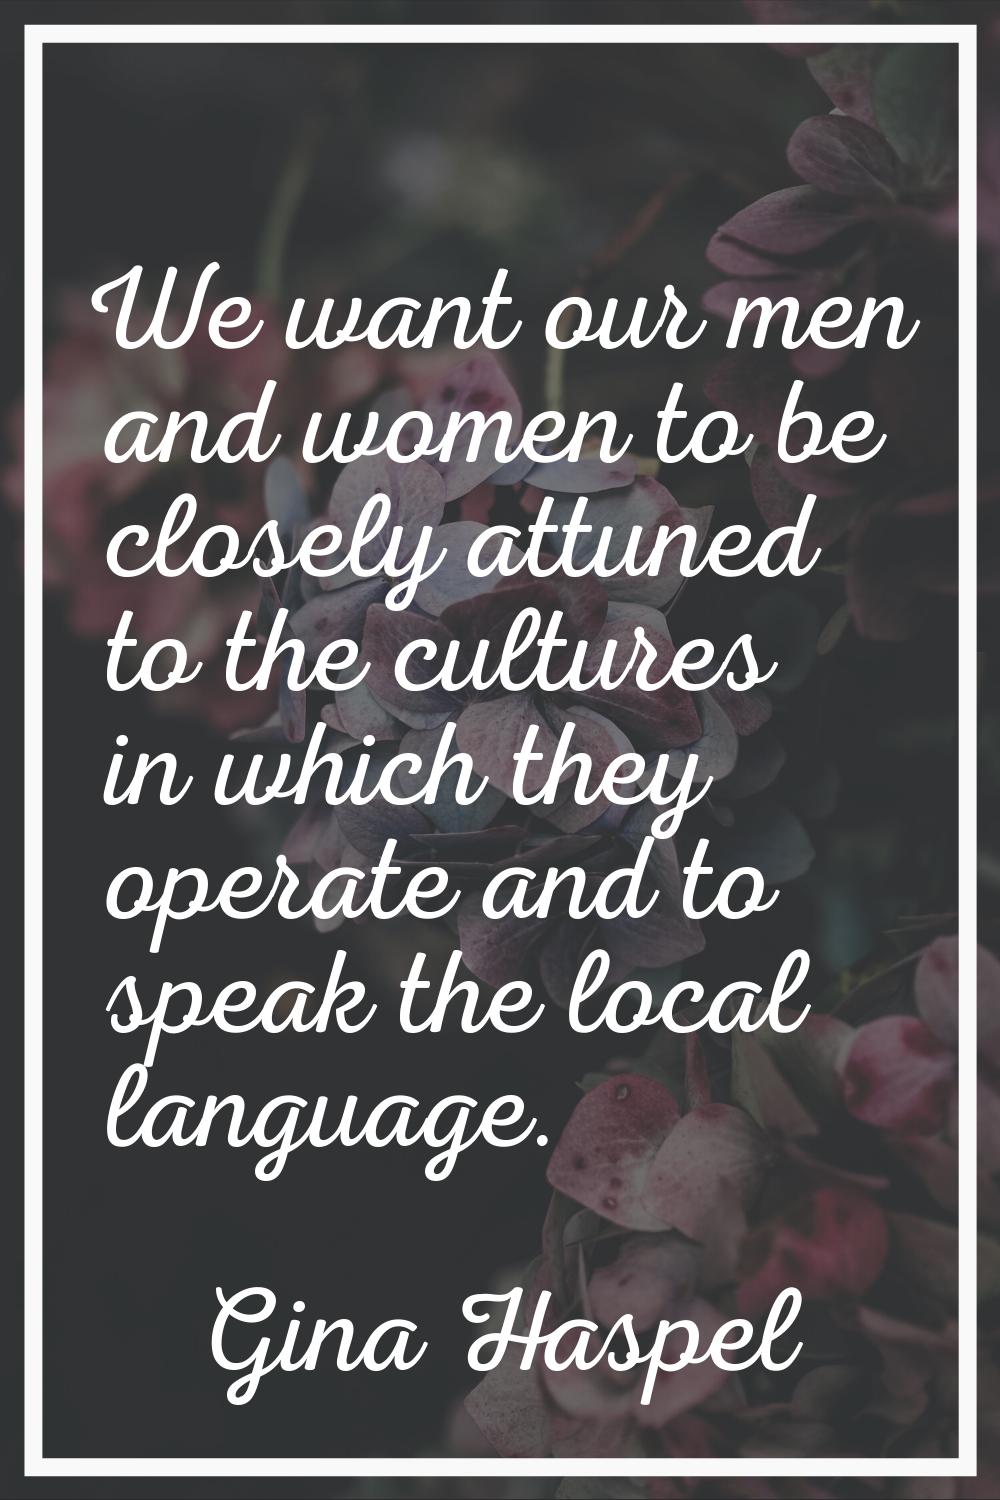 We want our men and women to be closely attuned to the cultures in which they operate and to speak 